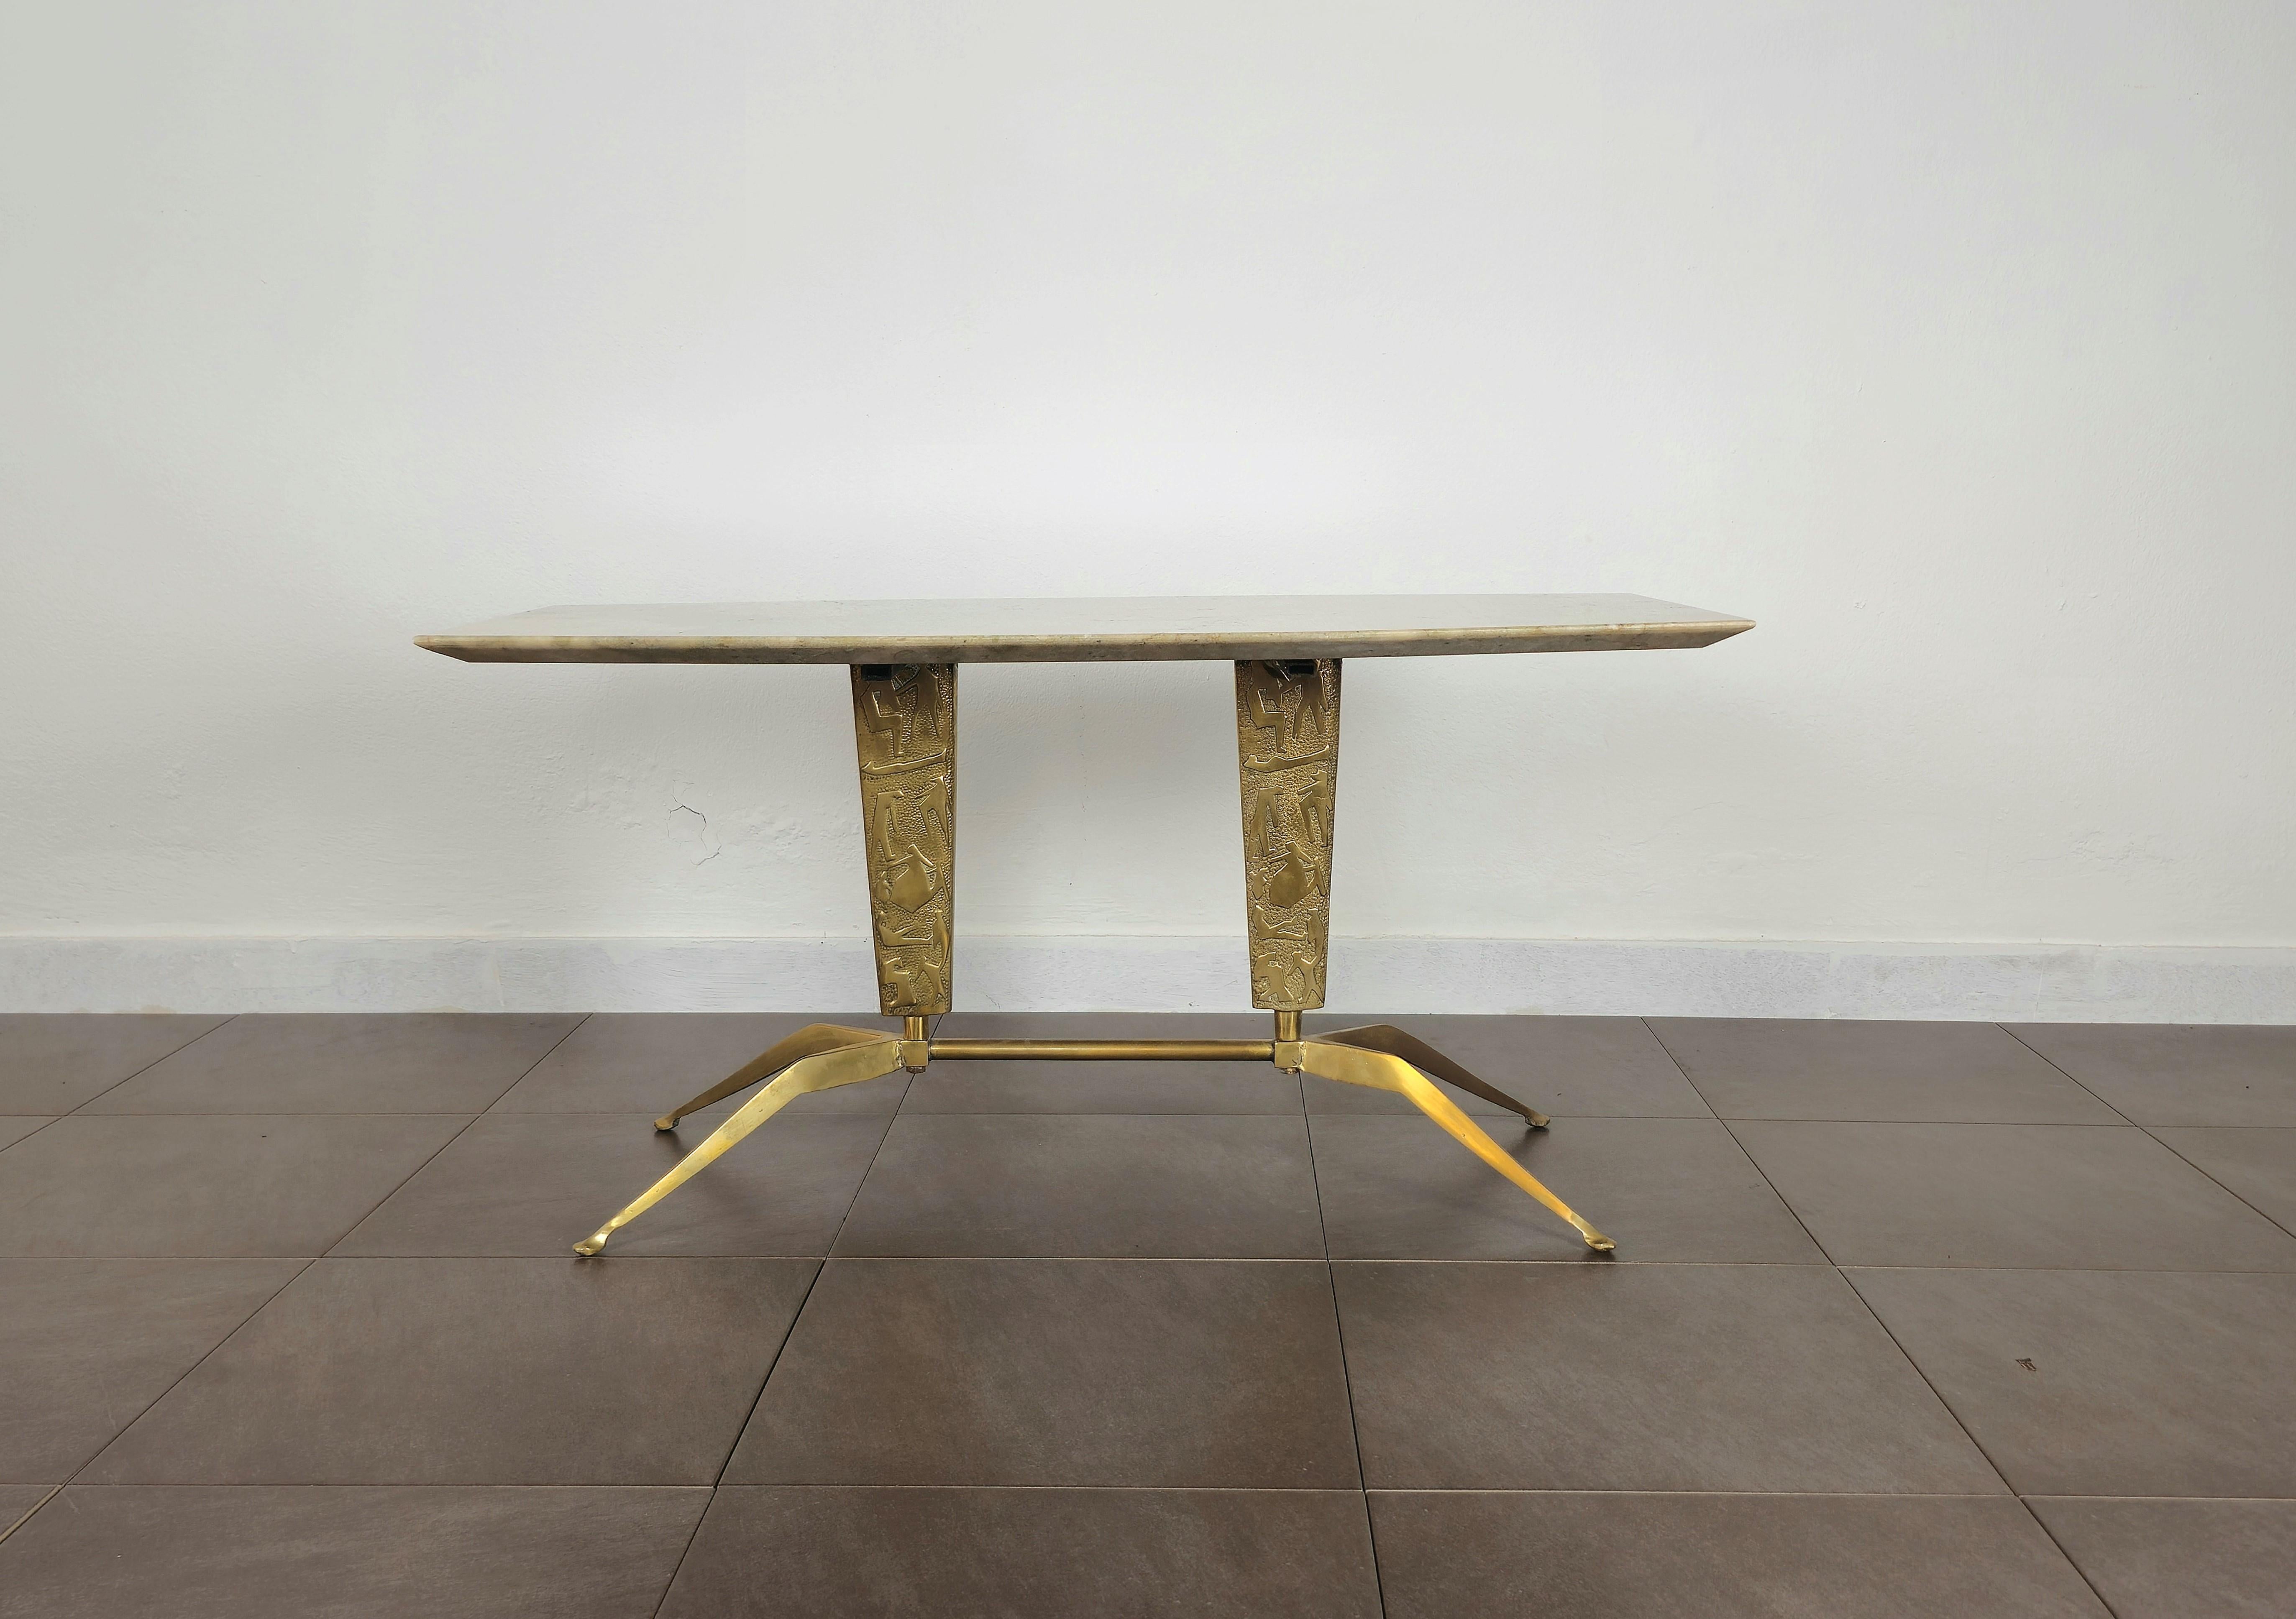 20th Century Coffee Cocktail Table Brass Marble Midcentury Modern Italian Design 1950s For Sale